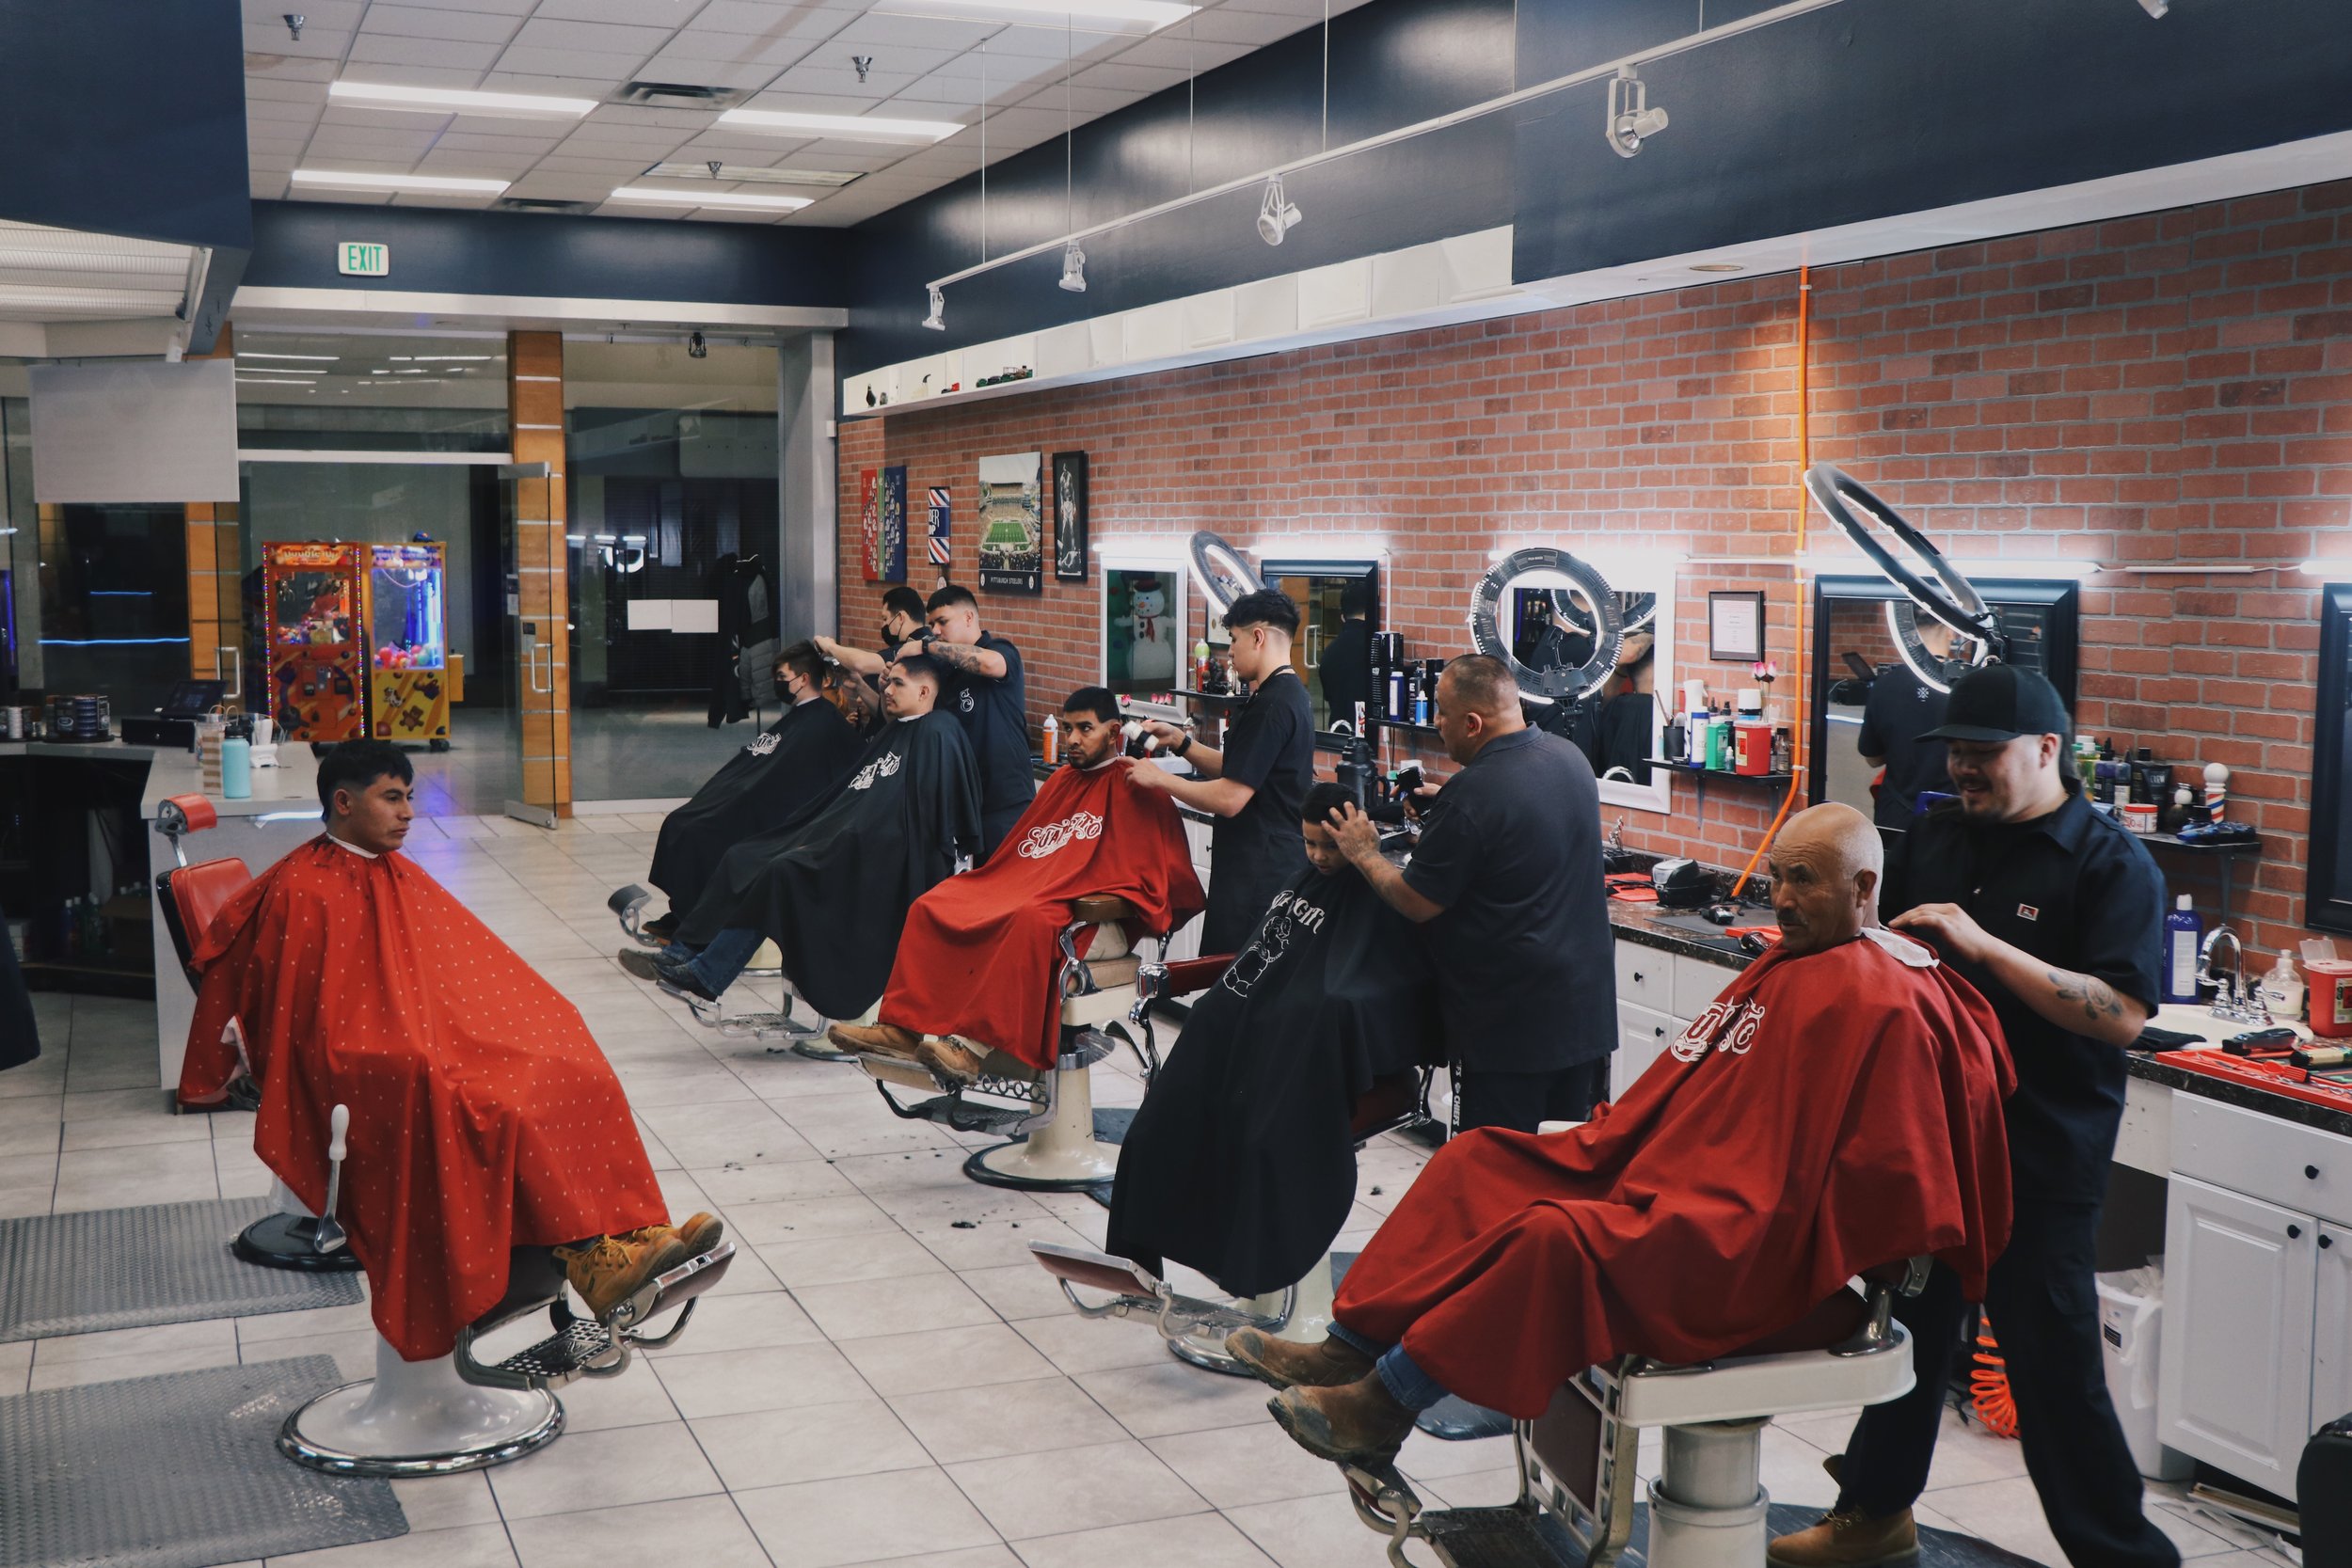 Would a uk barber make it in a US barber shop? : r/Hair